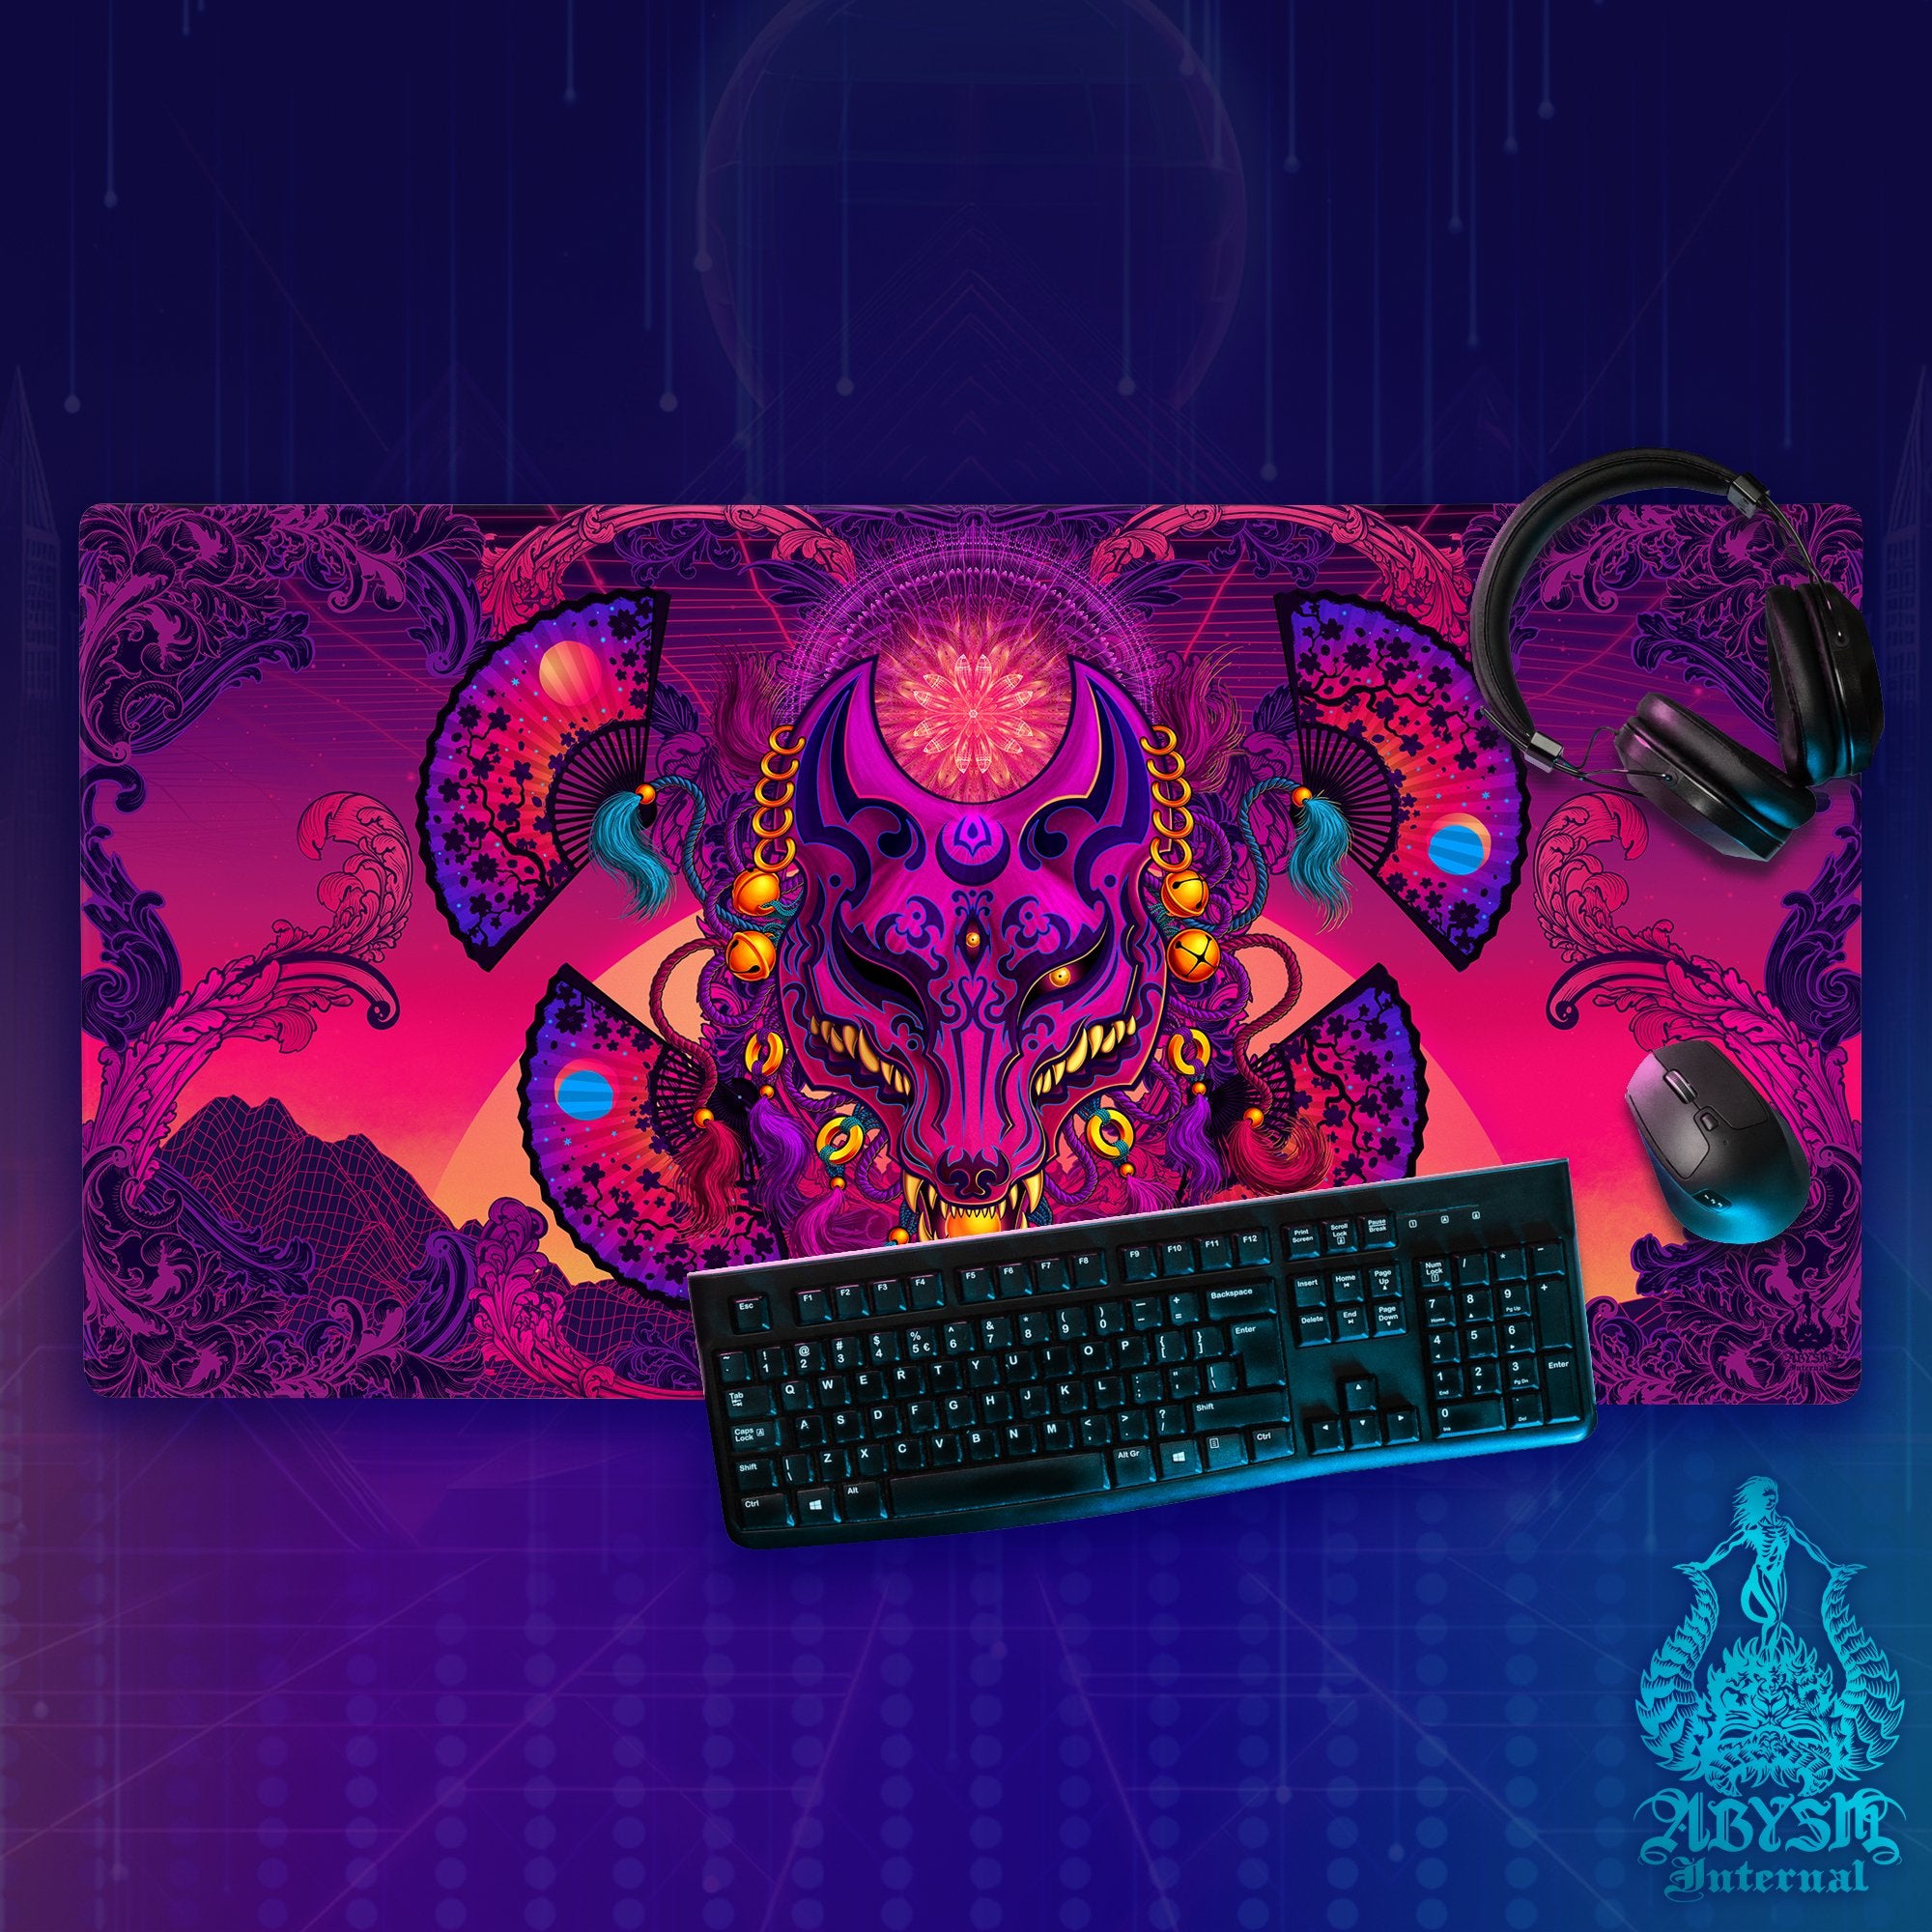 Psychedelic Gaming Desk Mat, Fox Mask Mouse Pad, Kitsune Table Protector Cover, Youkai Workpad, Japanese Anime and Manga Art Print - Vaporwave - Abysm Internal